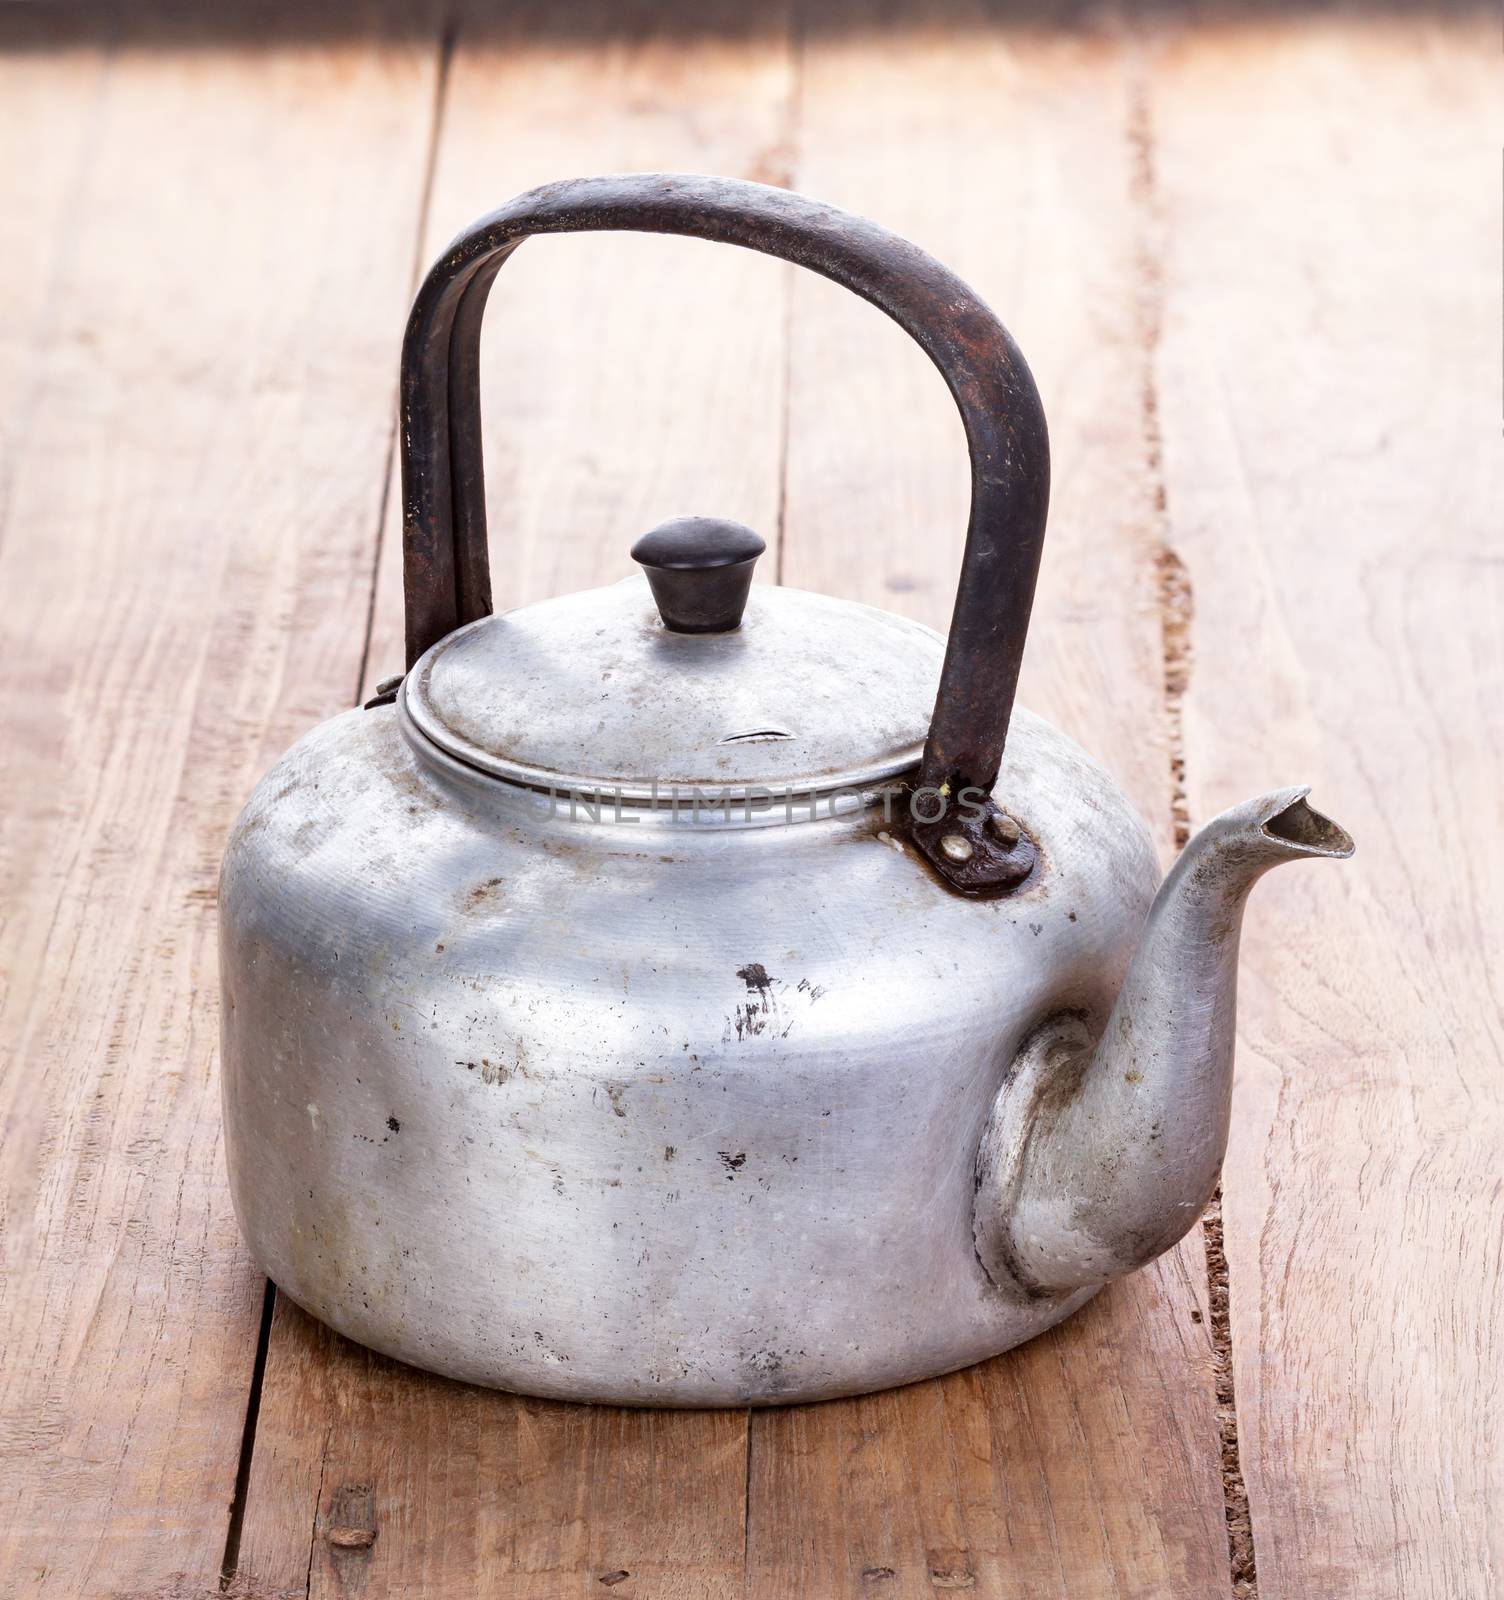 dirty classic aluminum kettle on wooden background by supersaiyan